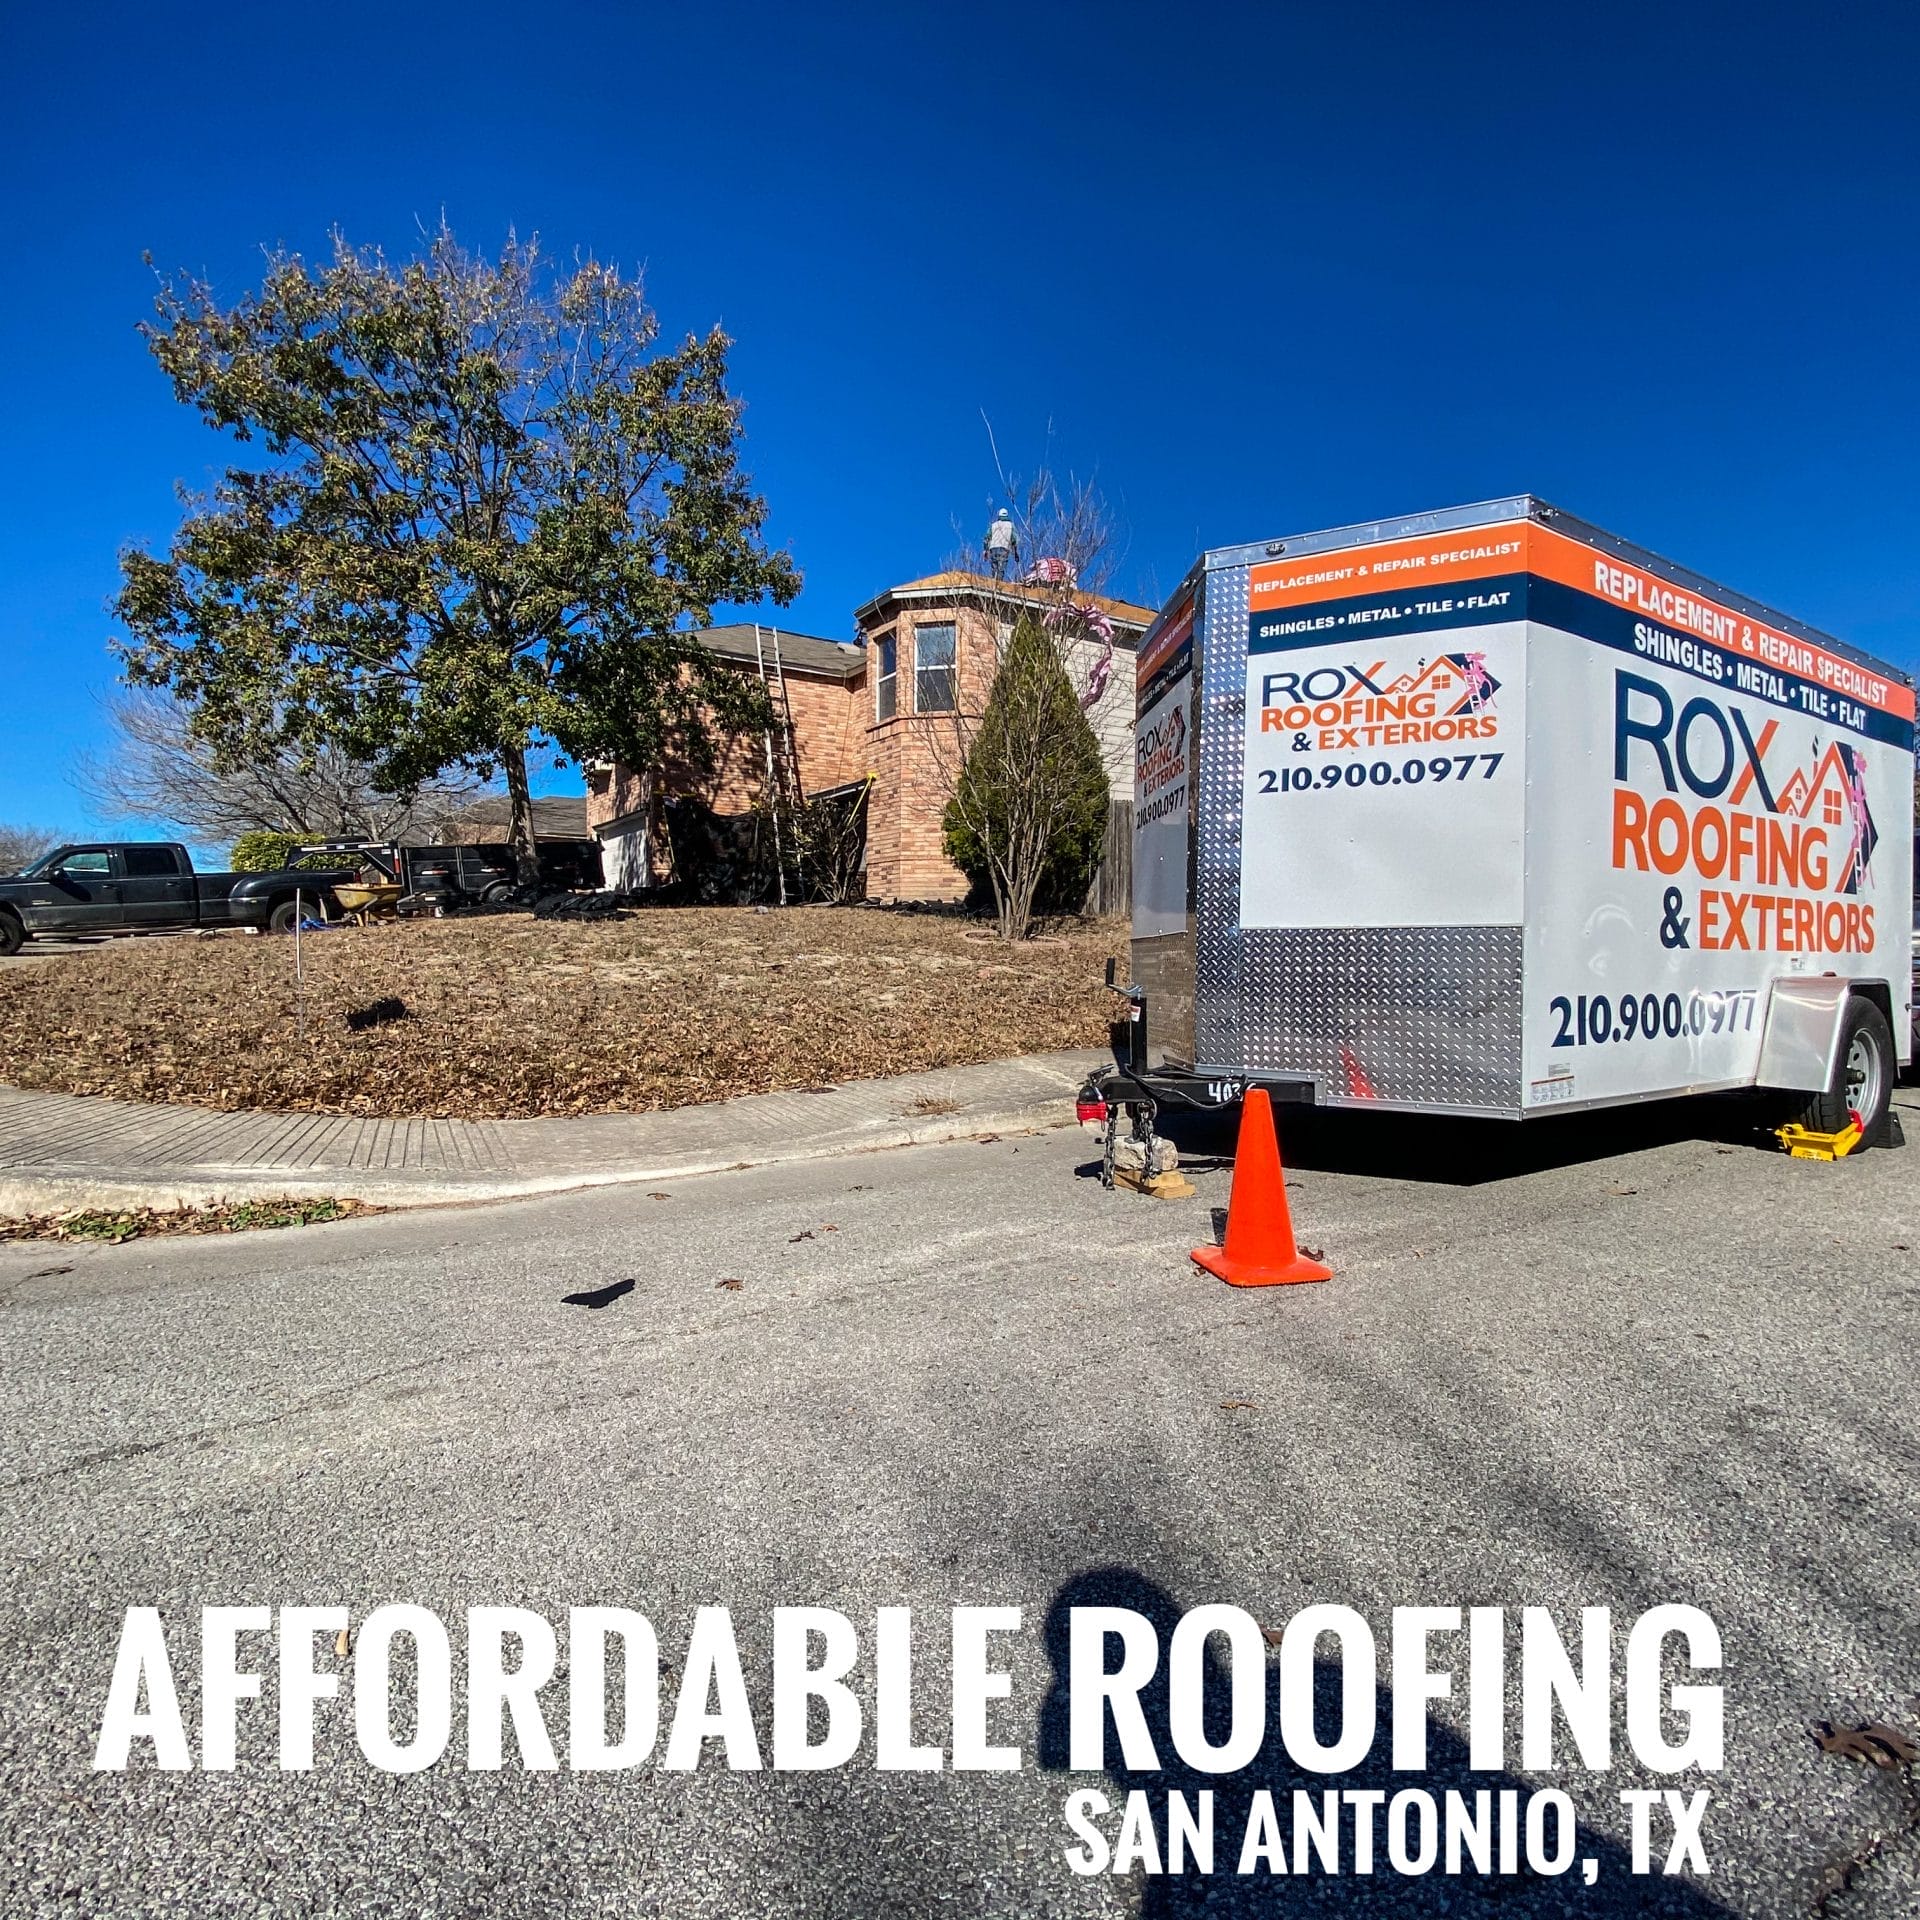 Affordable Roofing San Antonio